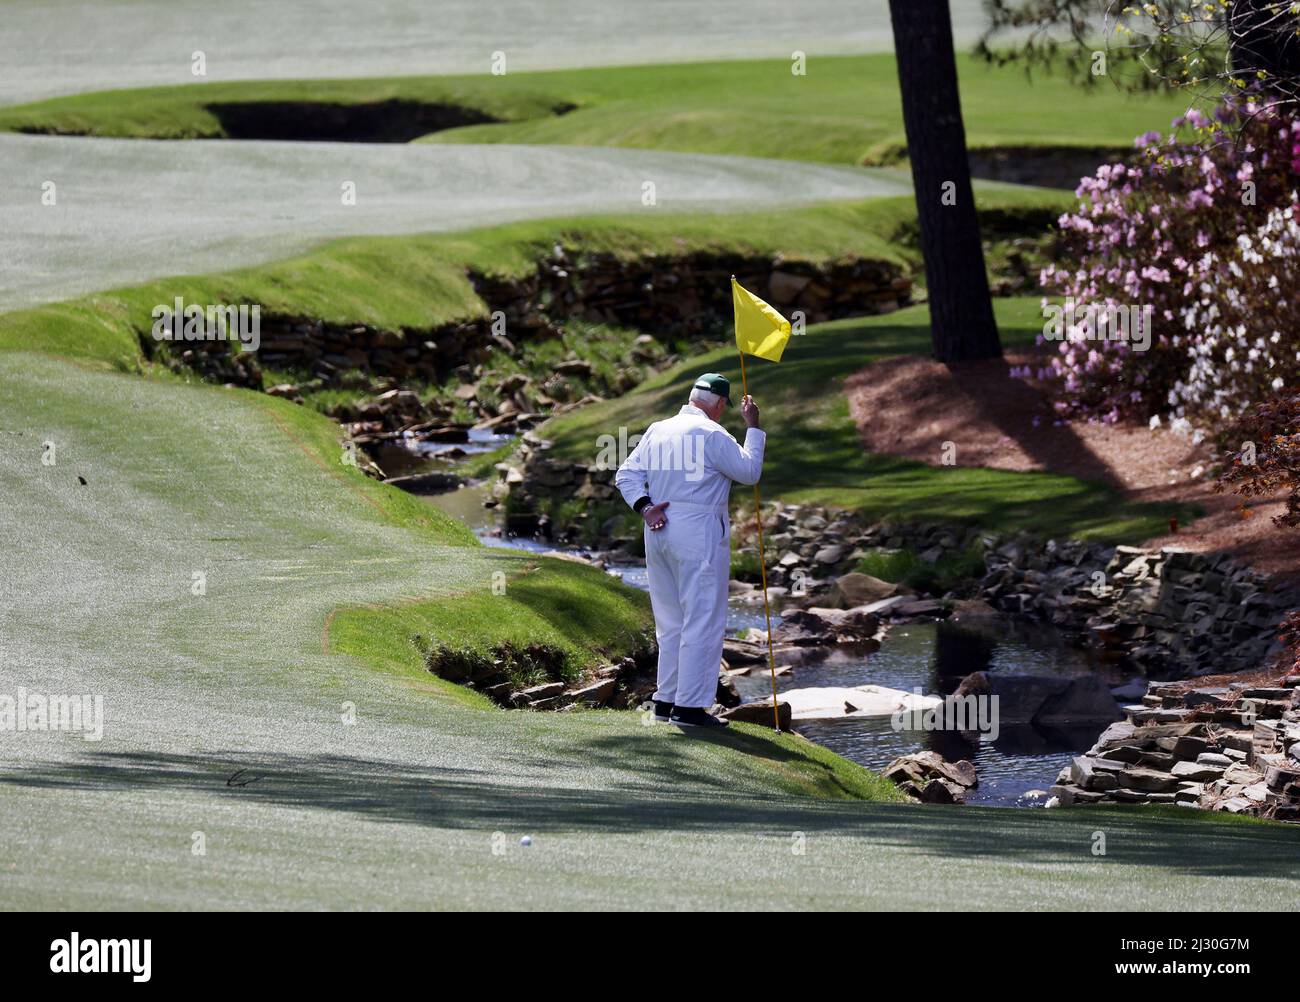 Augusta, United States. 04th Apr, 2022. A caddie holds a flag to mark the area where a ball lands Rae's Creek on the 13th hole during a practice round leading up to the Masters golf tournament at Augusta National Golf Club in Augusta, Georgia on Monday, April 4, 2022. Photo by John Angelillo/UPI Credit: UPI/Alamy Live News Stock Photo